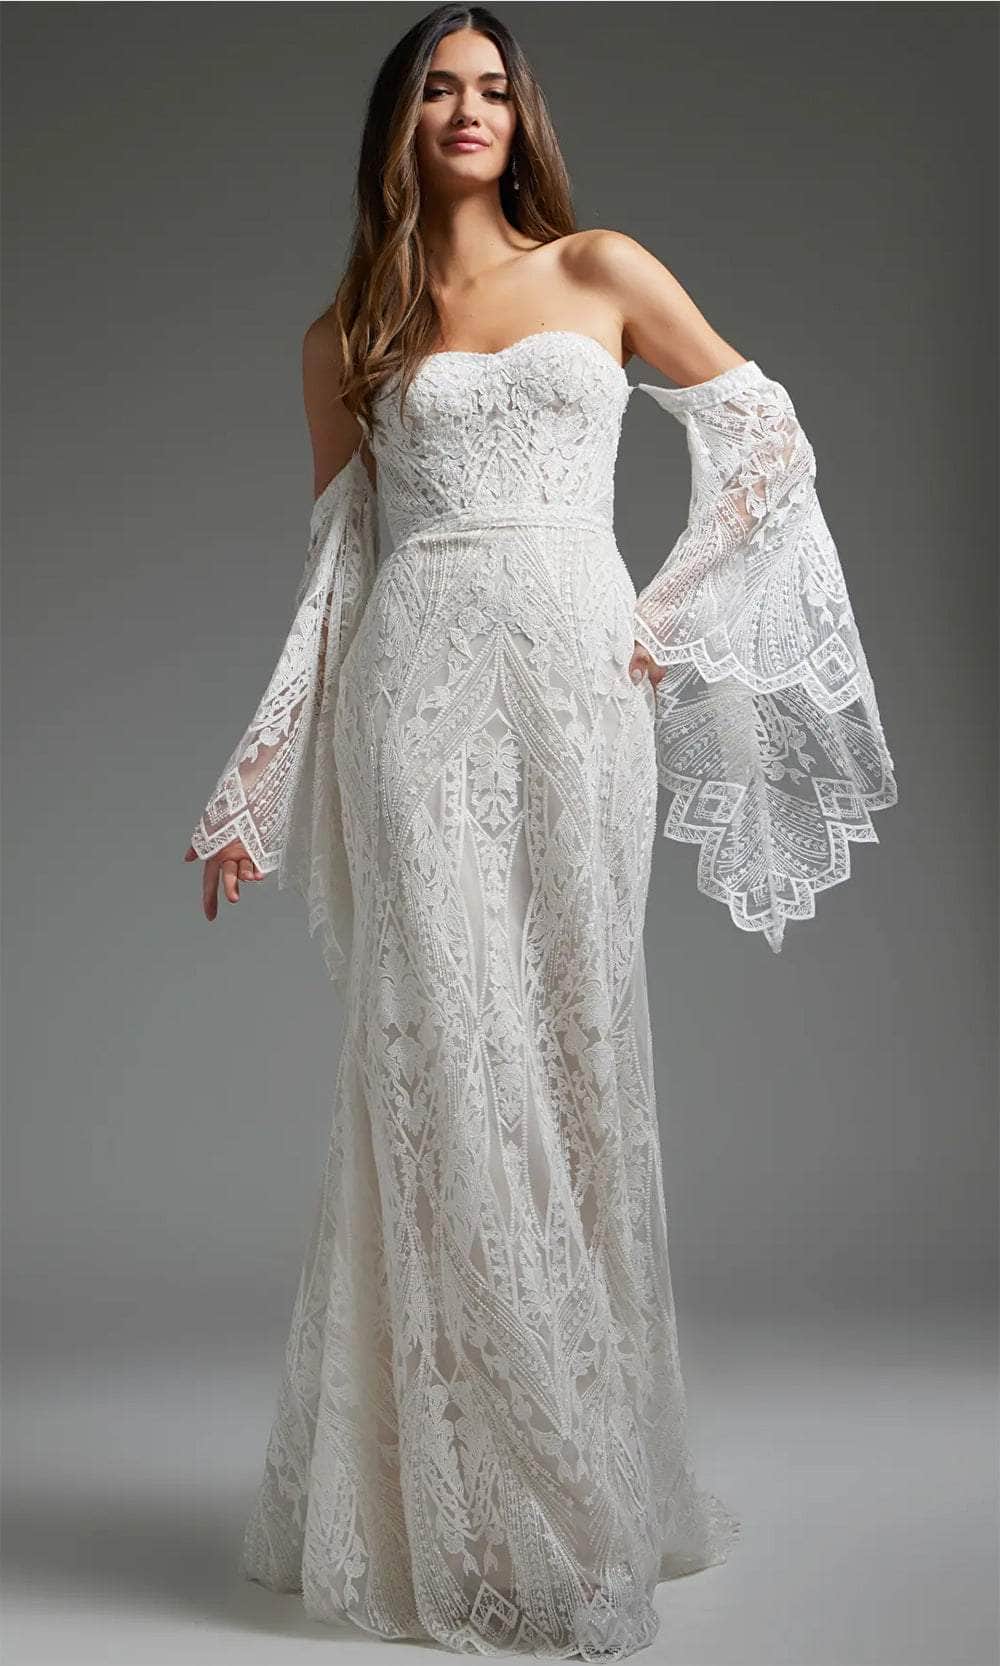 Jovani JB39162 - Bell Sleeve Lace Bridal Gown
